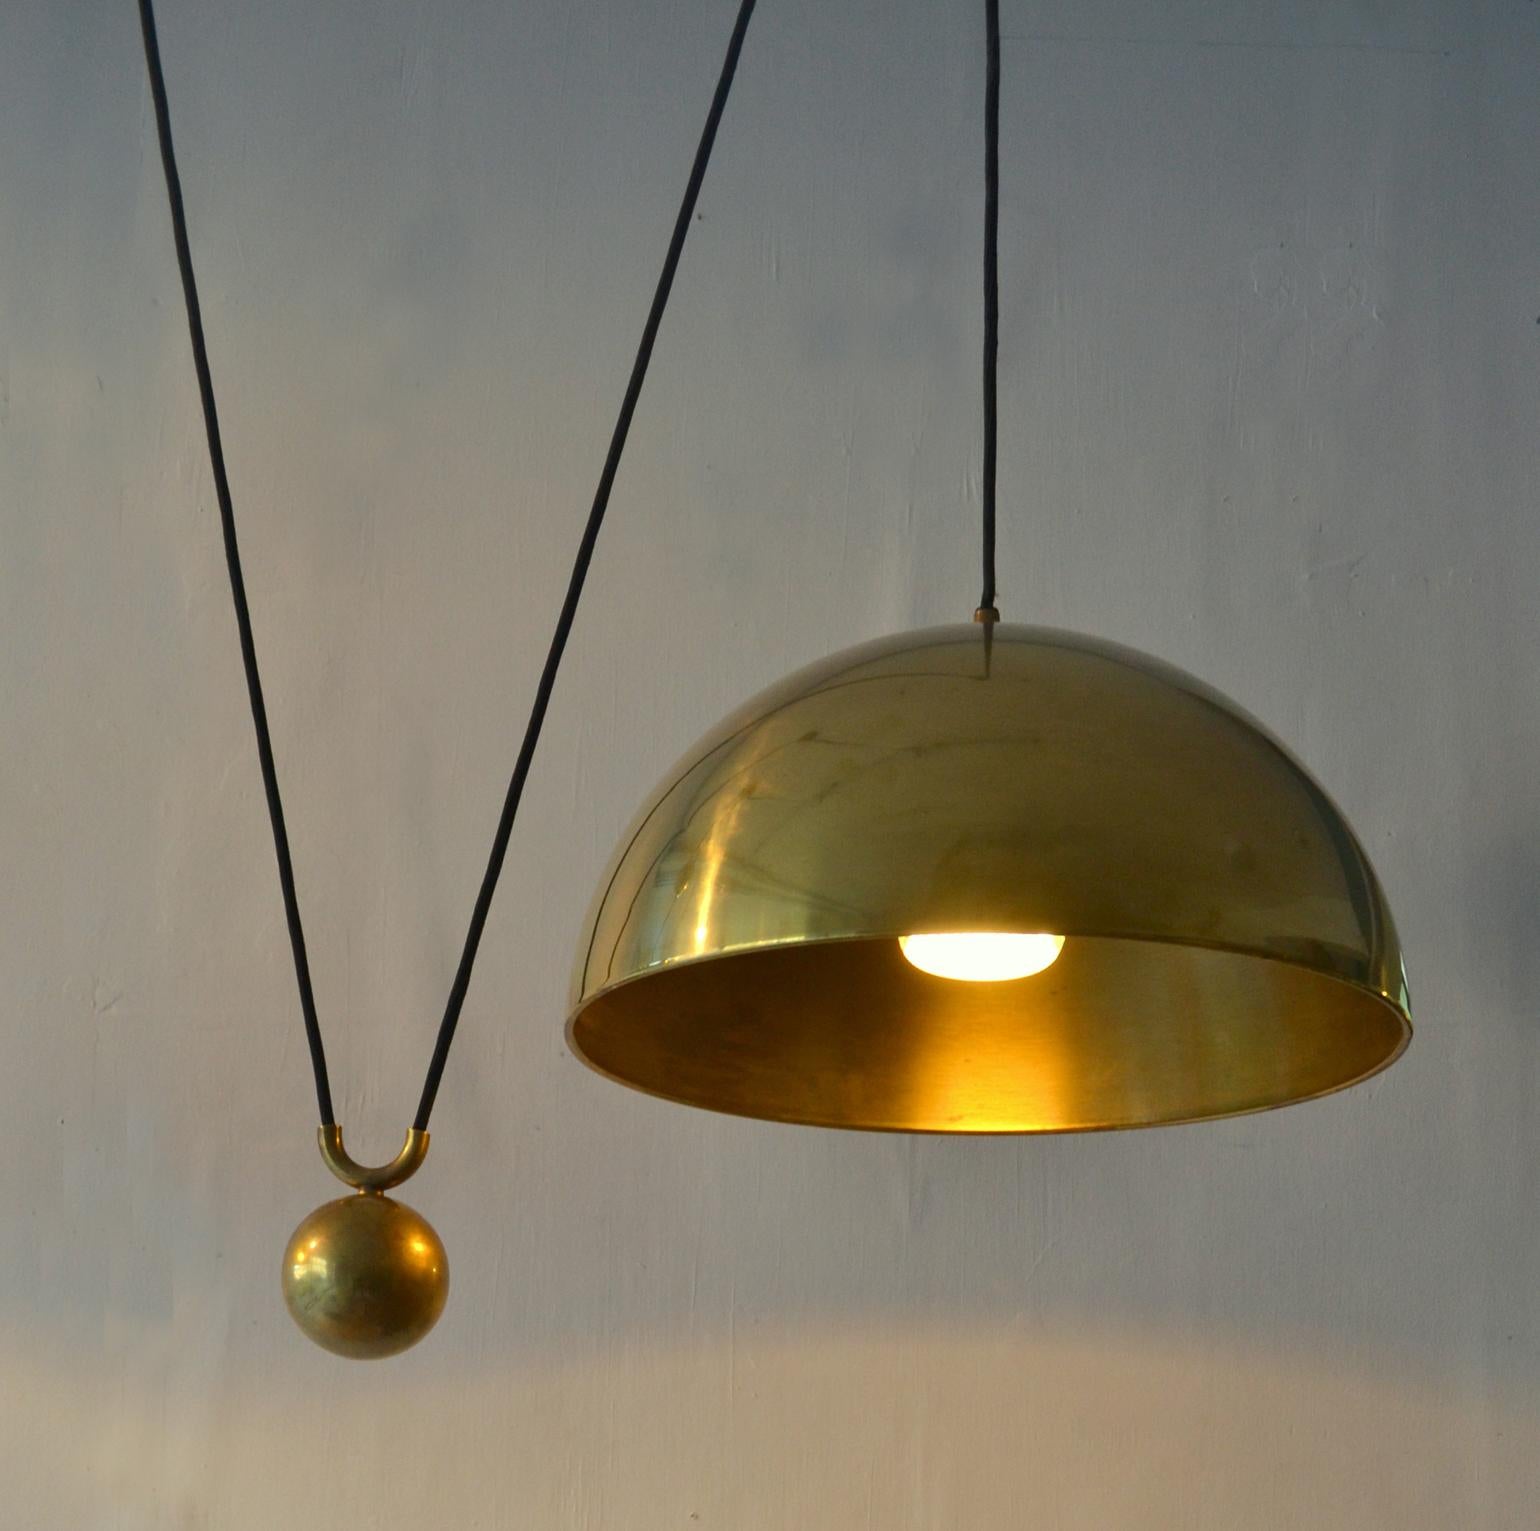 Counterbalance pendant 'Posa' by Florian Schulz side weight. Strong and minimal pendant in a high quality brass moves smoothly up and down due to the solid brass counterweight. The brass is coated. 
Excellent timeless design of a very functional